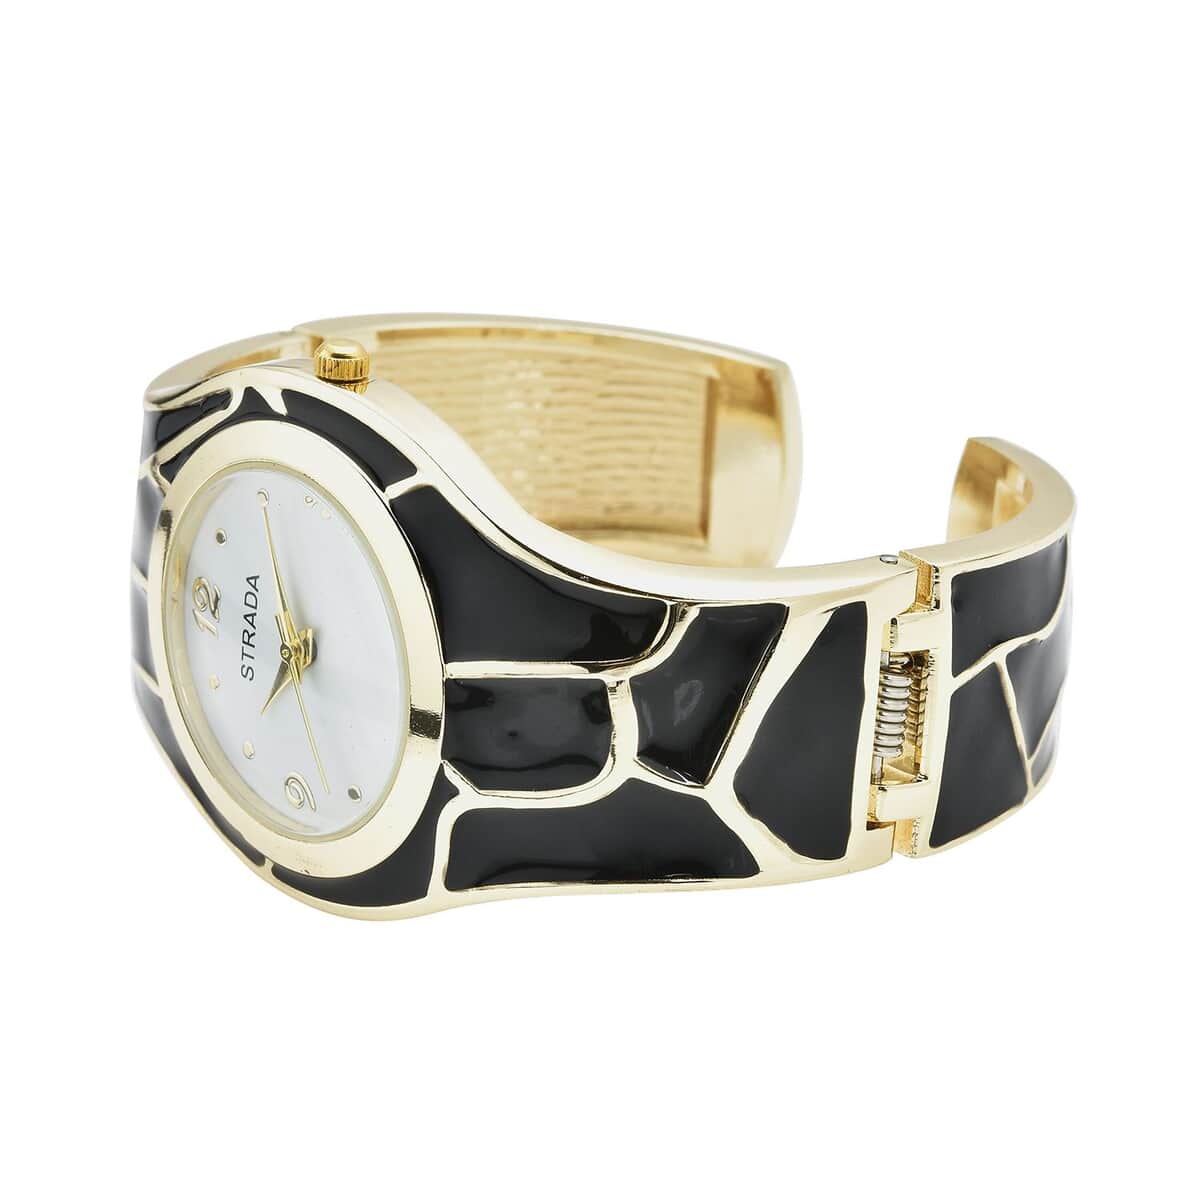 Strada Black Enameled Japanese Movement Watch in Goldtone Strap (29.50mm) (7.0-7.75 Inch) image number 4